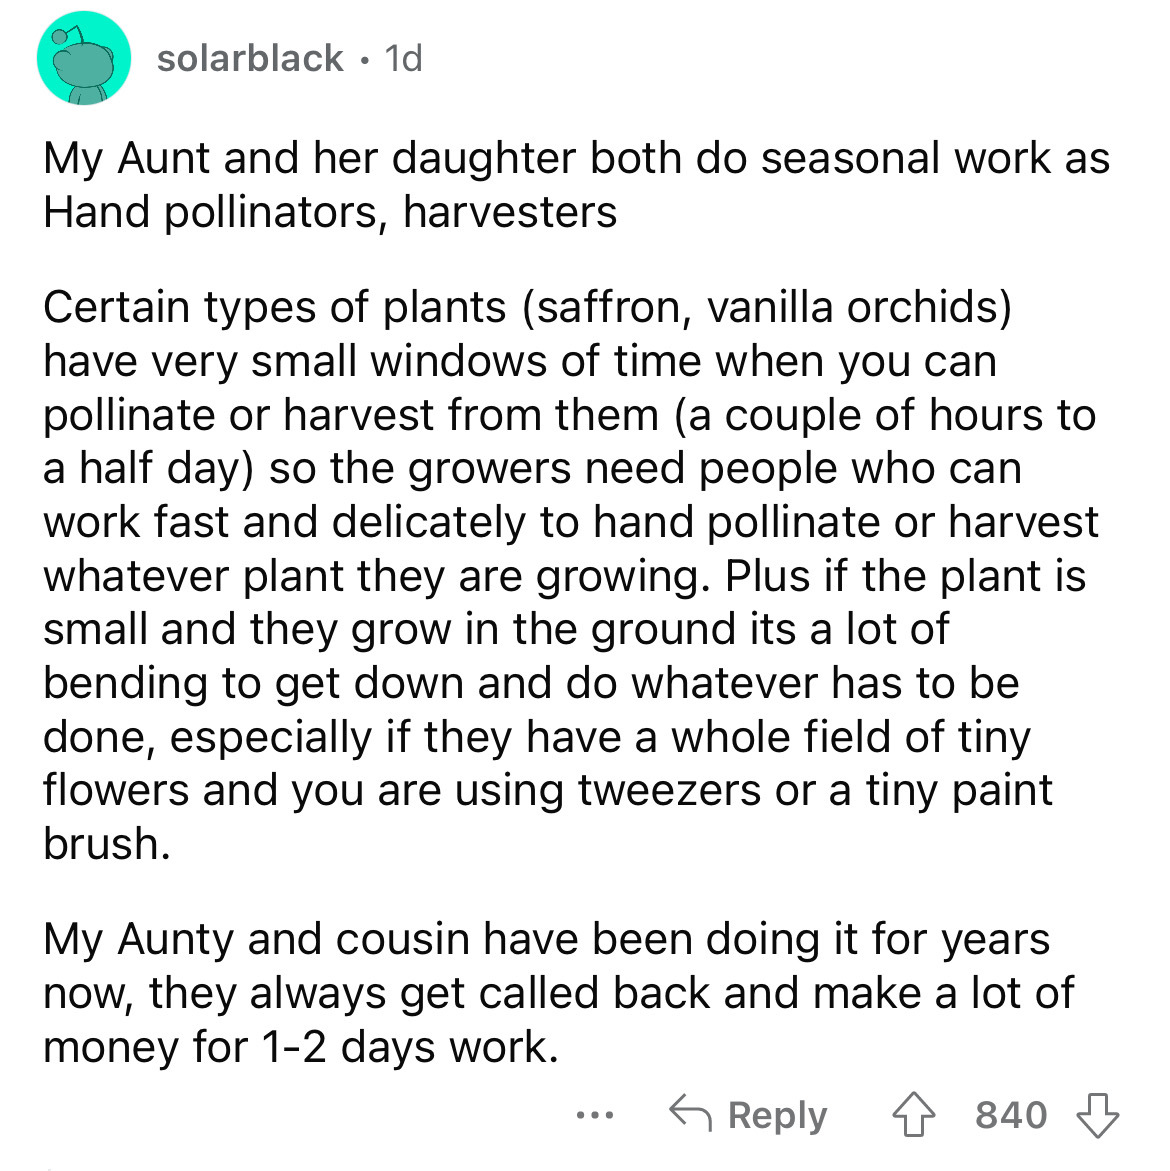 angle - solarblack 1d My Aunt and her daughter both do seasonal work as Hand pollinators, harvesters Certain types of plants saffron, vanilla orchids have very small windows of time when you can pollinate or harvest from them a couple of hours to a half d